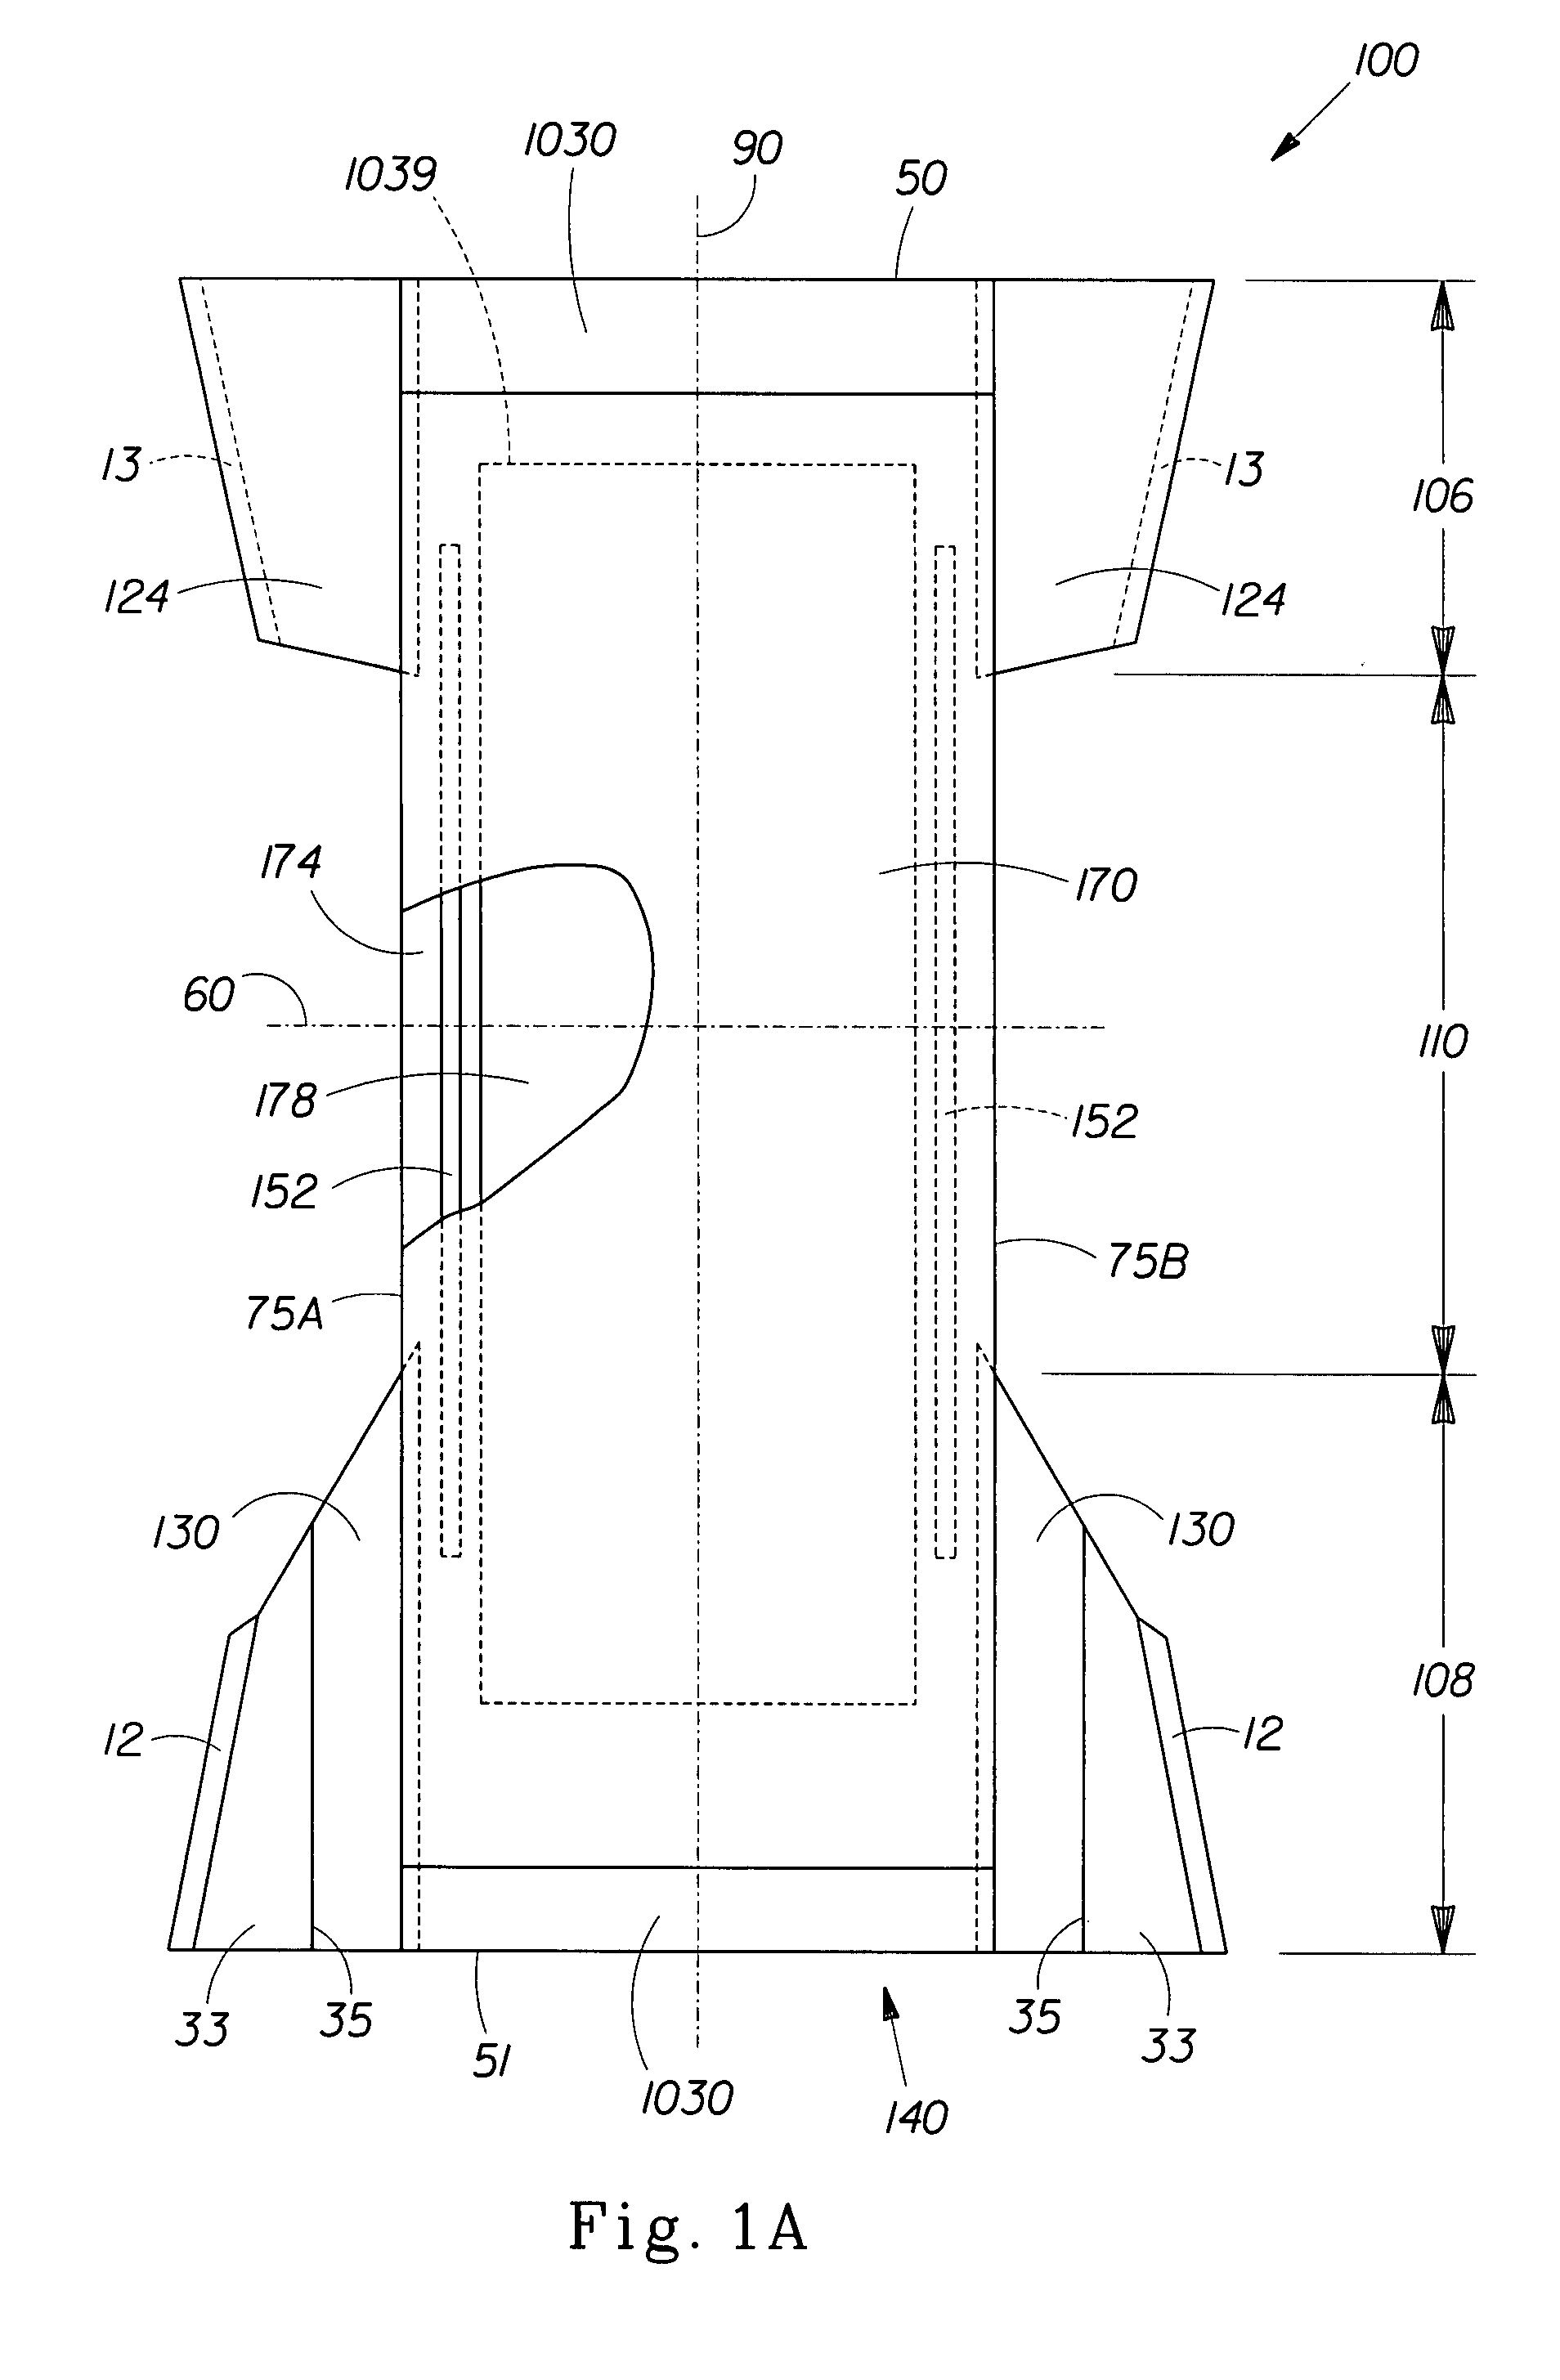 Absorbent article having refastenable and non-refastenable seams